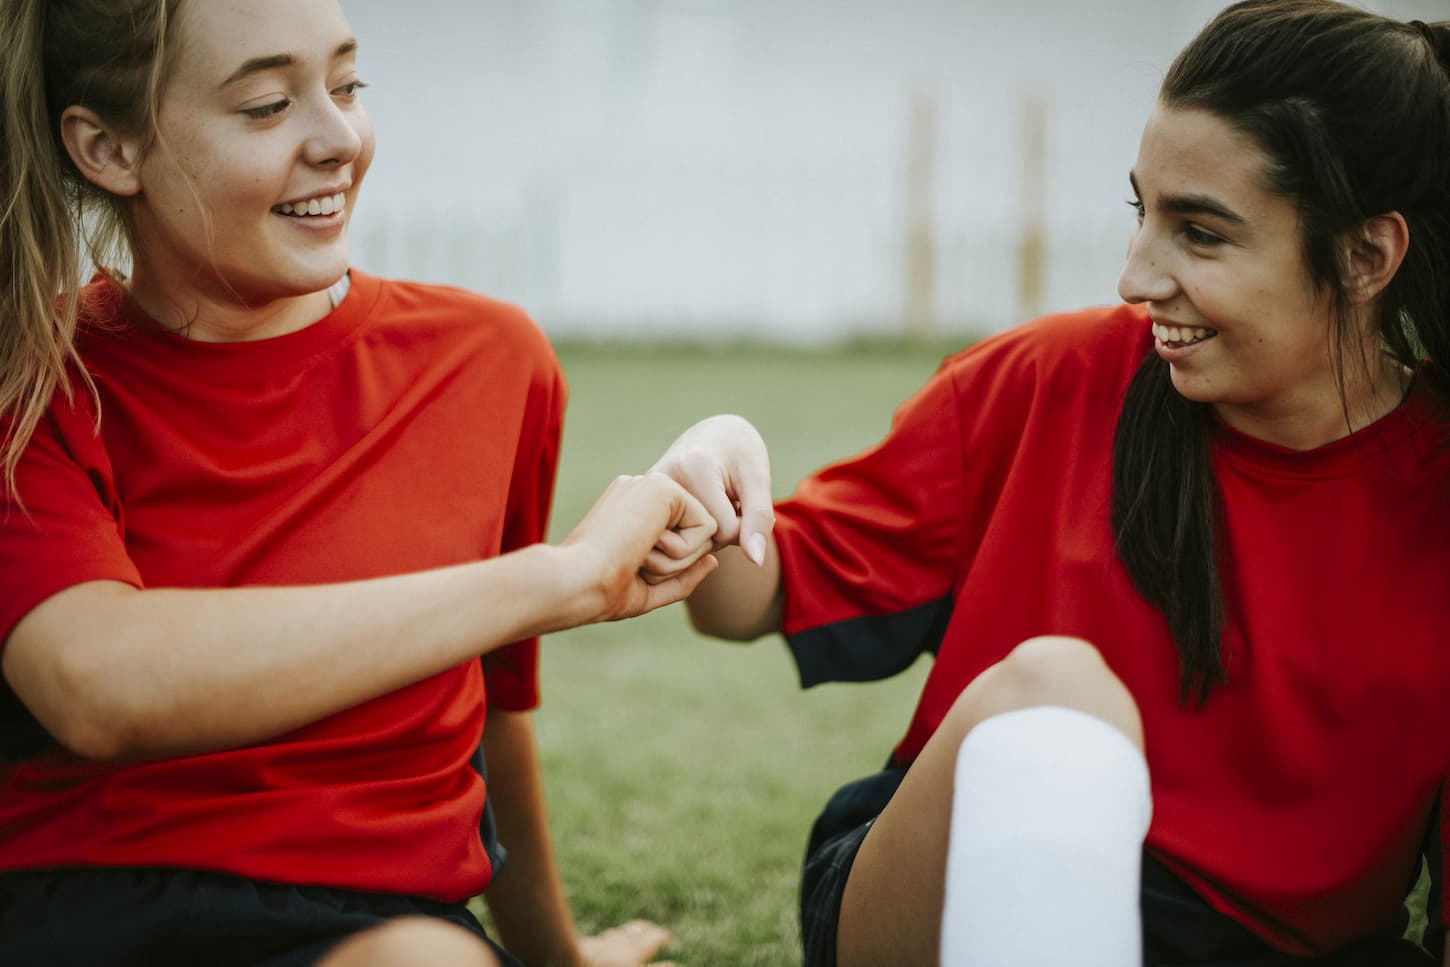 An image of Happy female rugby players doing a fist bump.